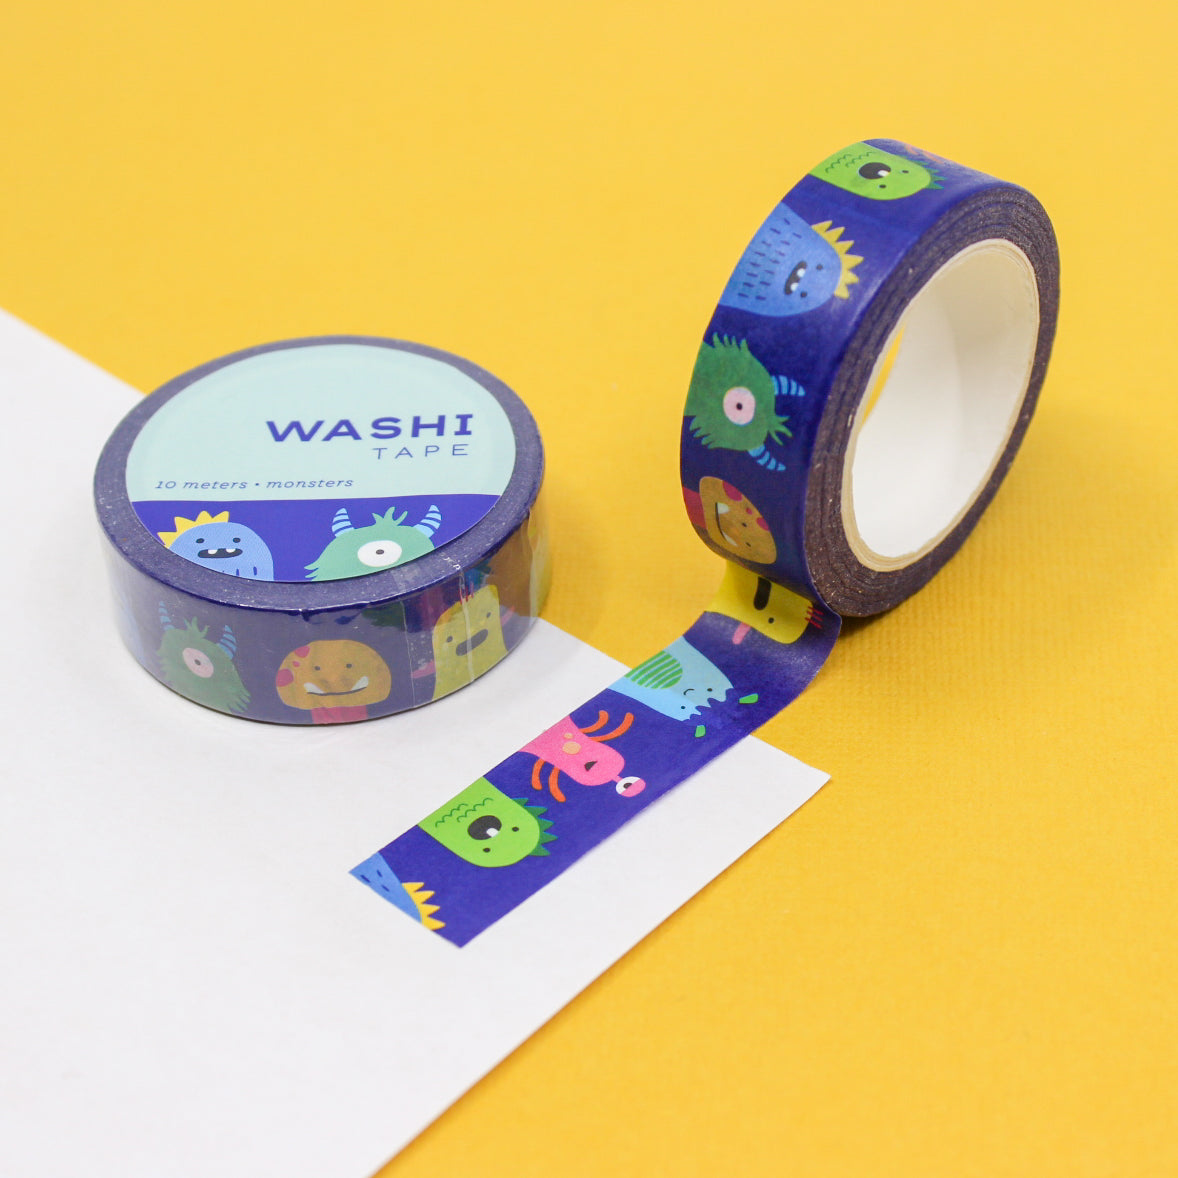 Add a dose of whimsy to your crafts with our Cute Colorful Monster Washi Tape, featuring charming and colorful monster designs. Perfect for adding a playful and imaginative touch to your projects. This tape is sold at BBB Supplies Craft Shop.